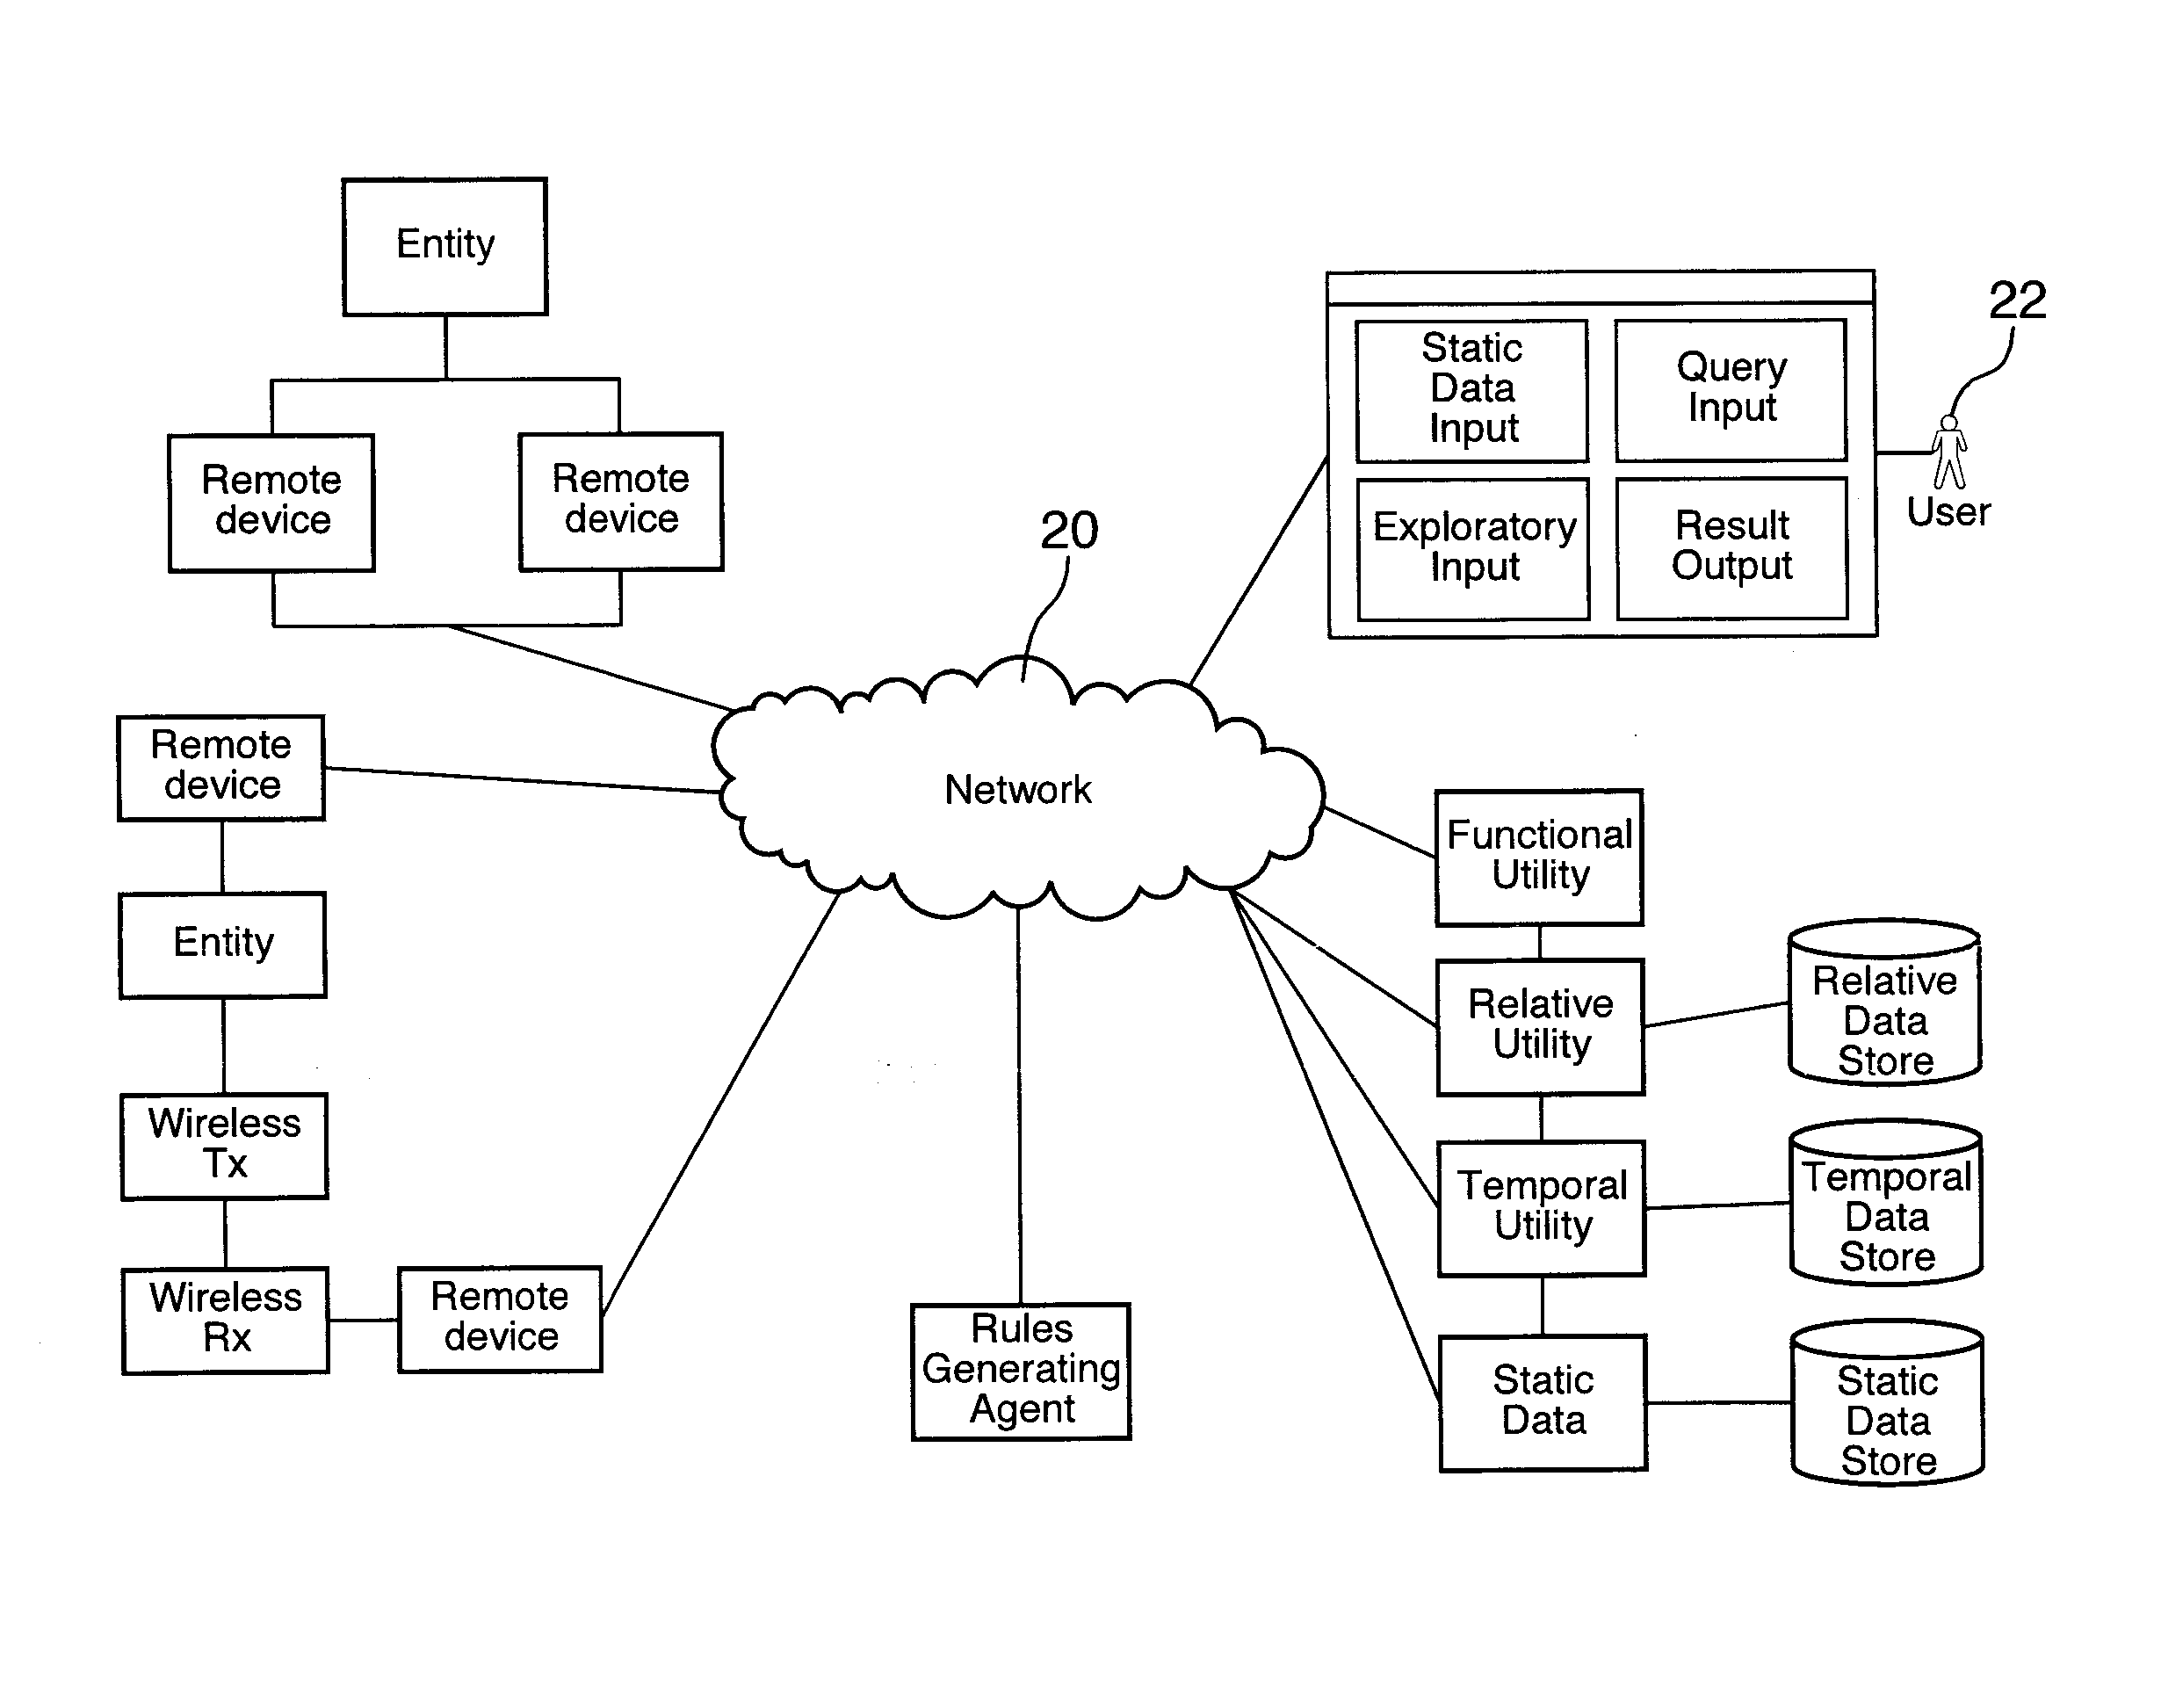 System, method and computer program for multi-dimensional temporal and relative data mining framework, analysis & sub-grouping